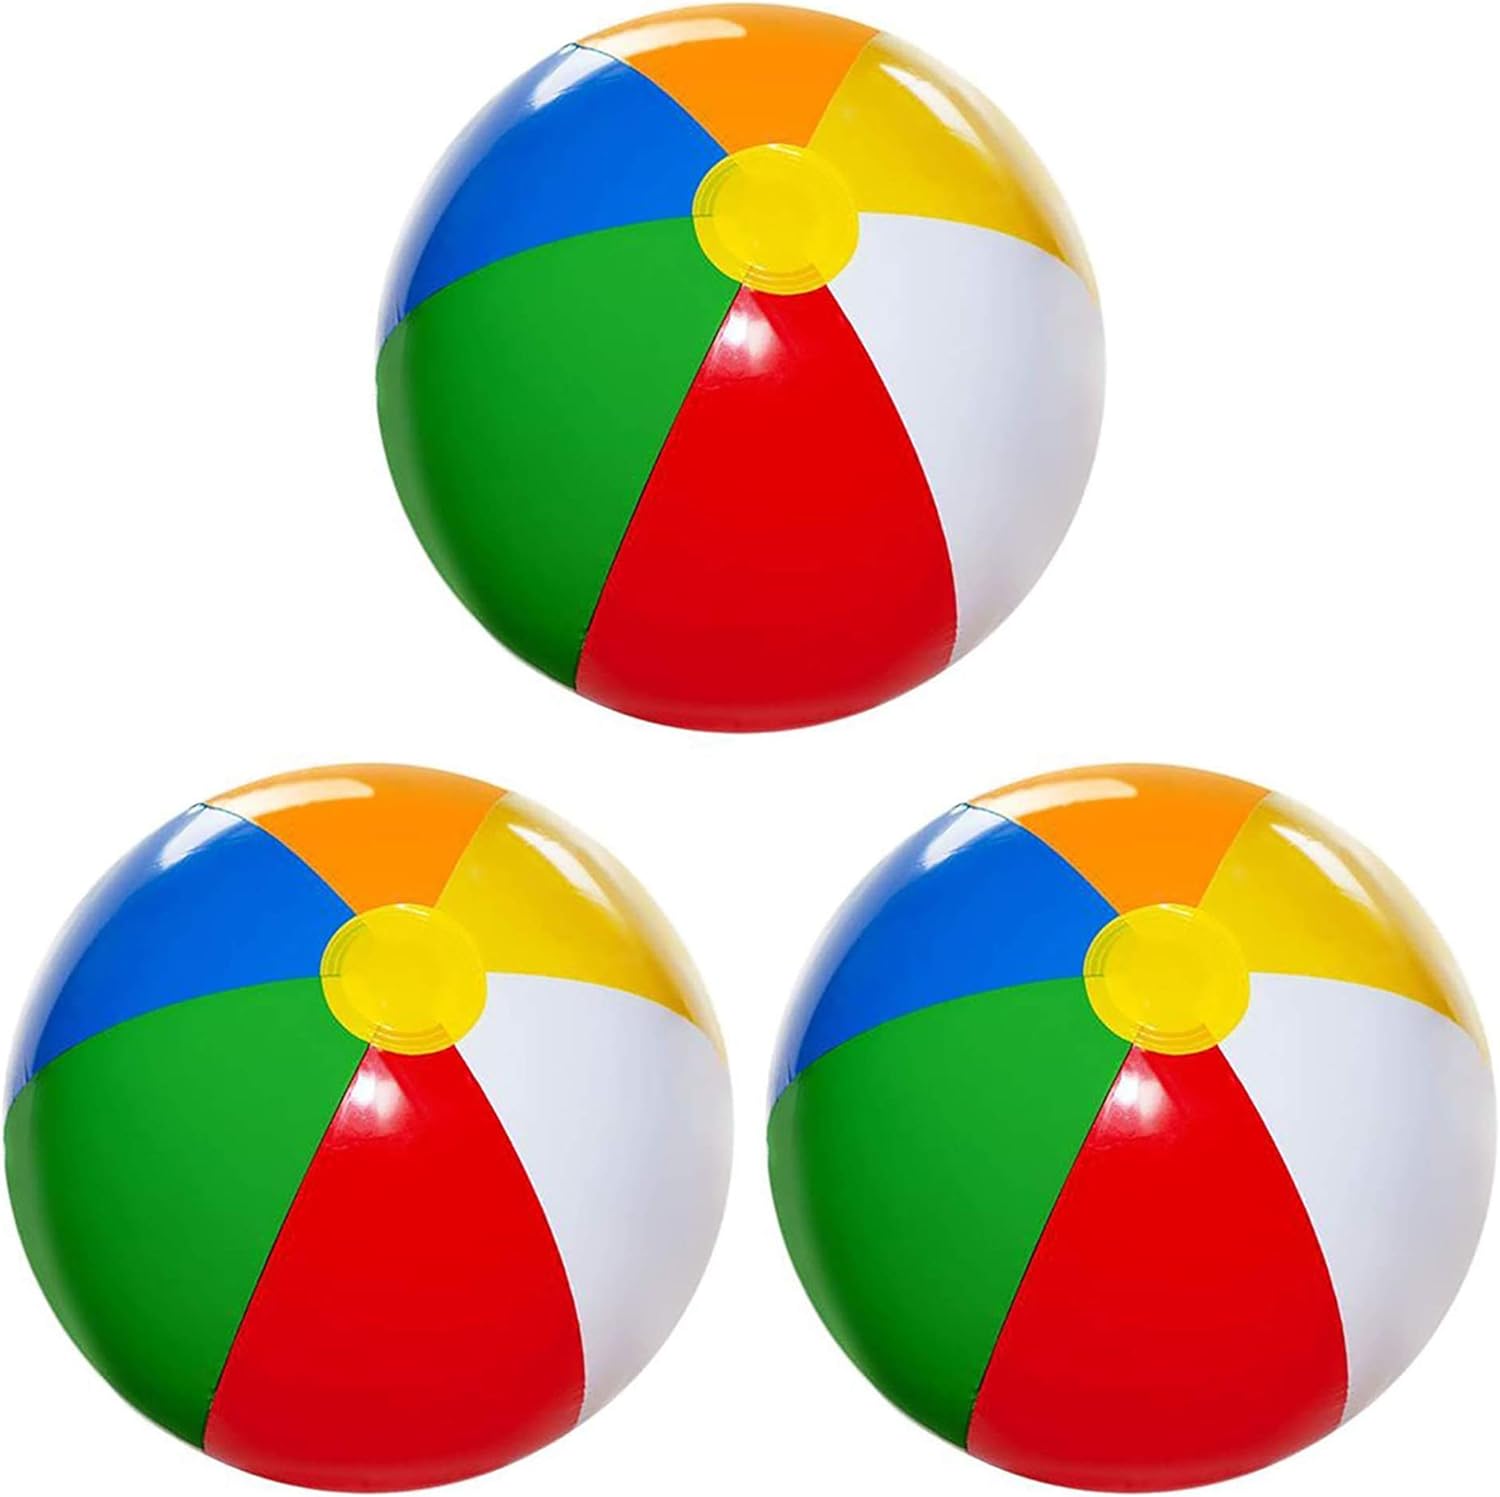 20 x 8.5" Inflatable Footballs Beach Ball Swimming Pool Kids Party Bags Fillers 